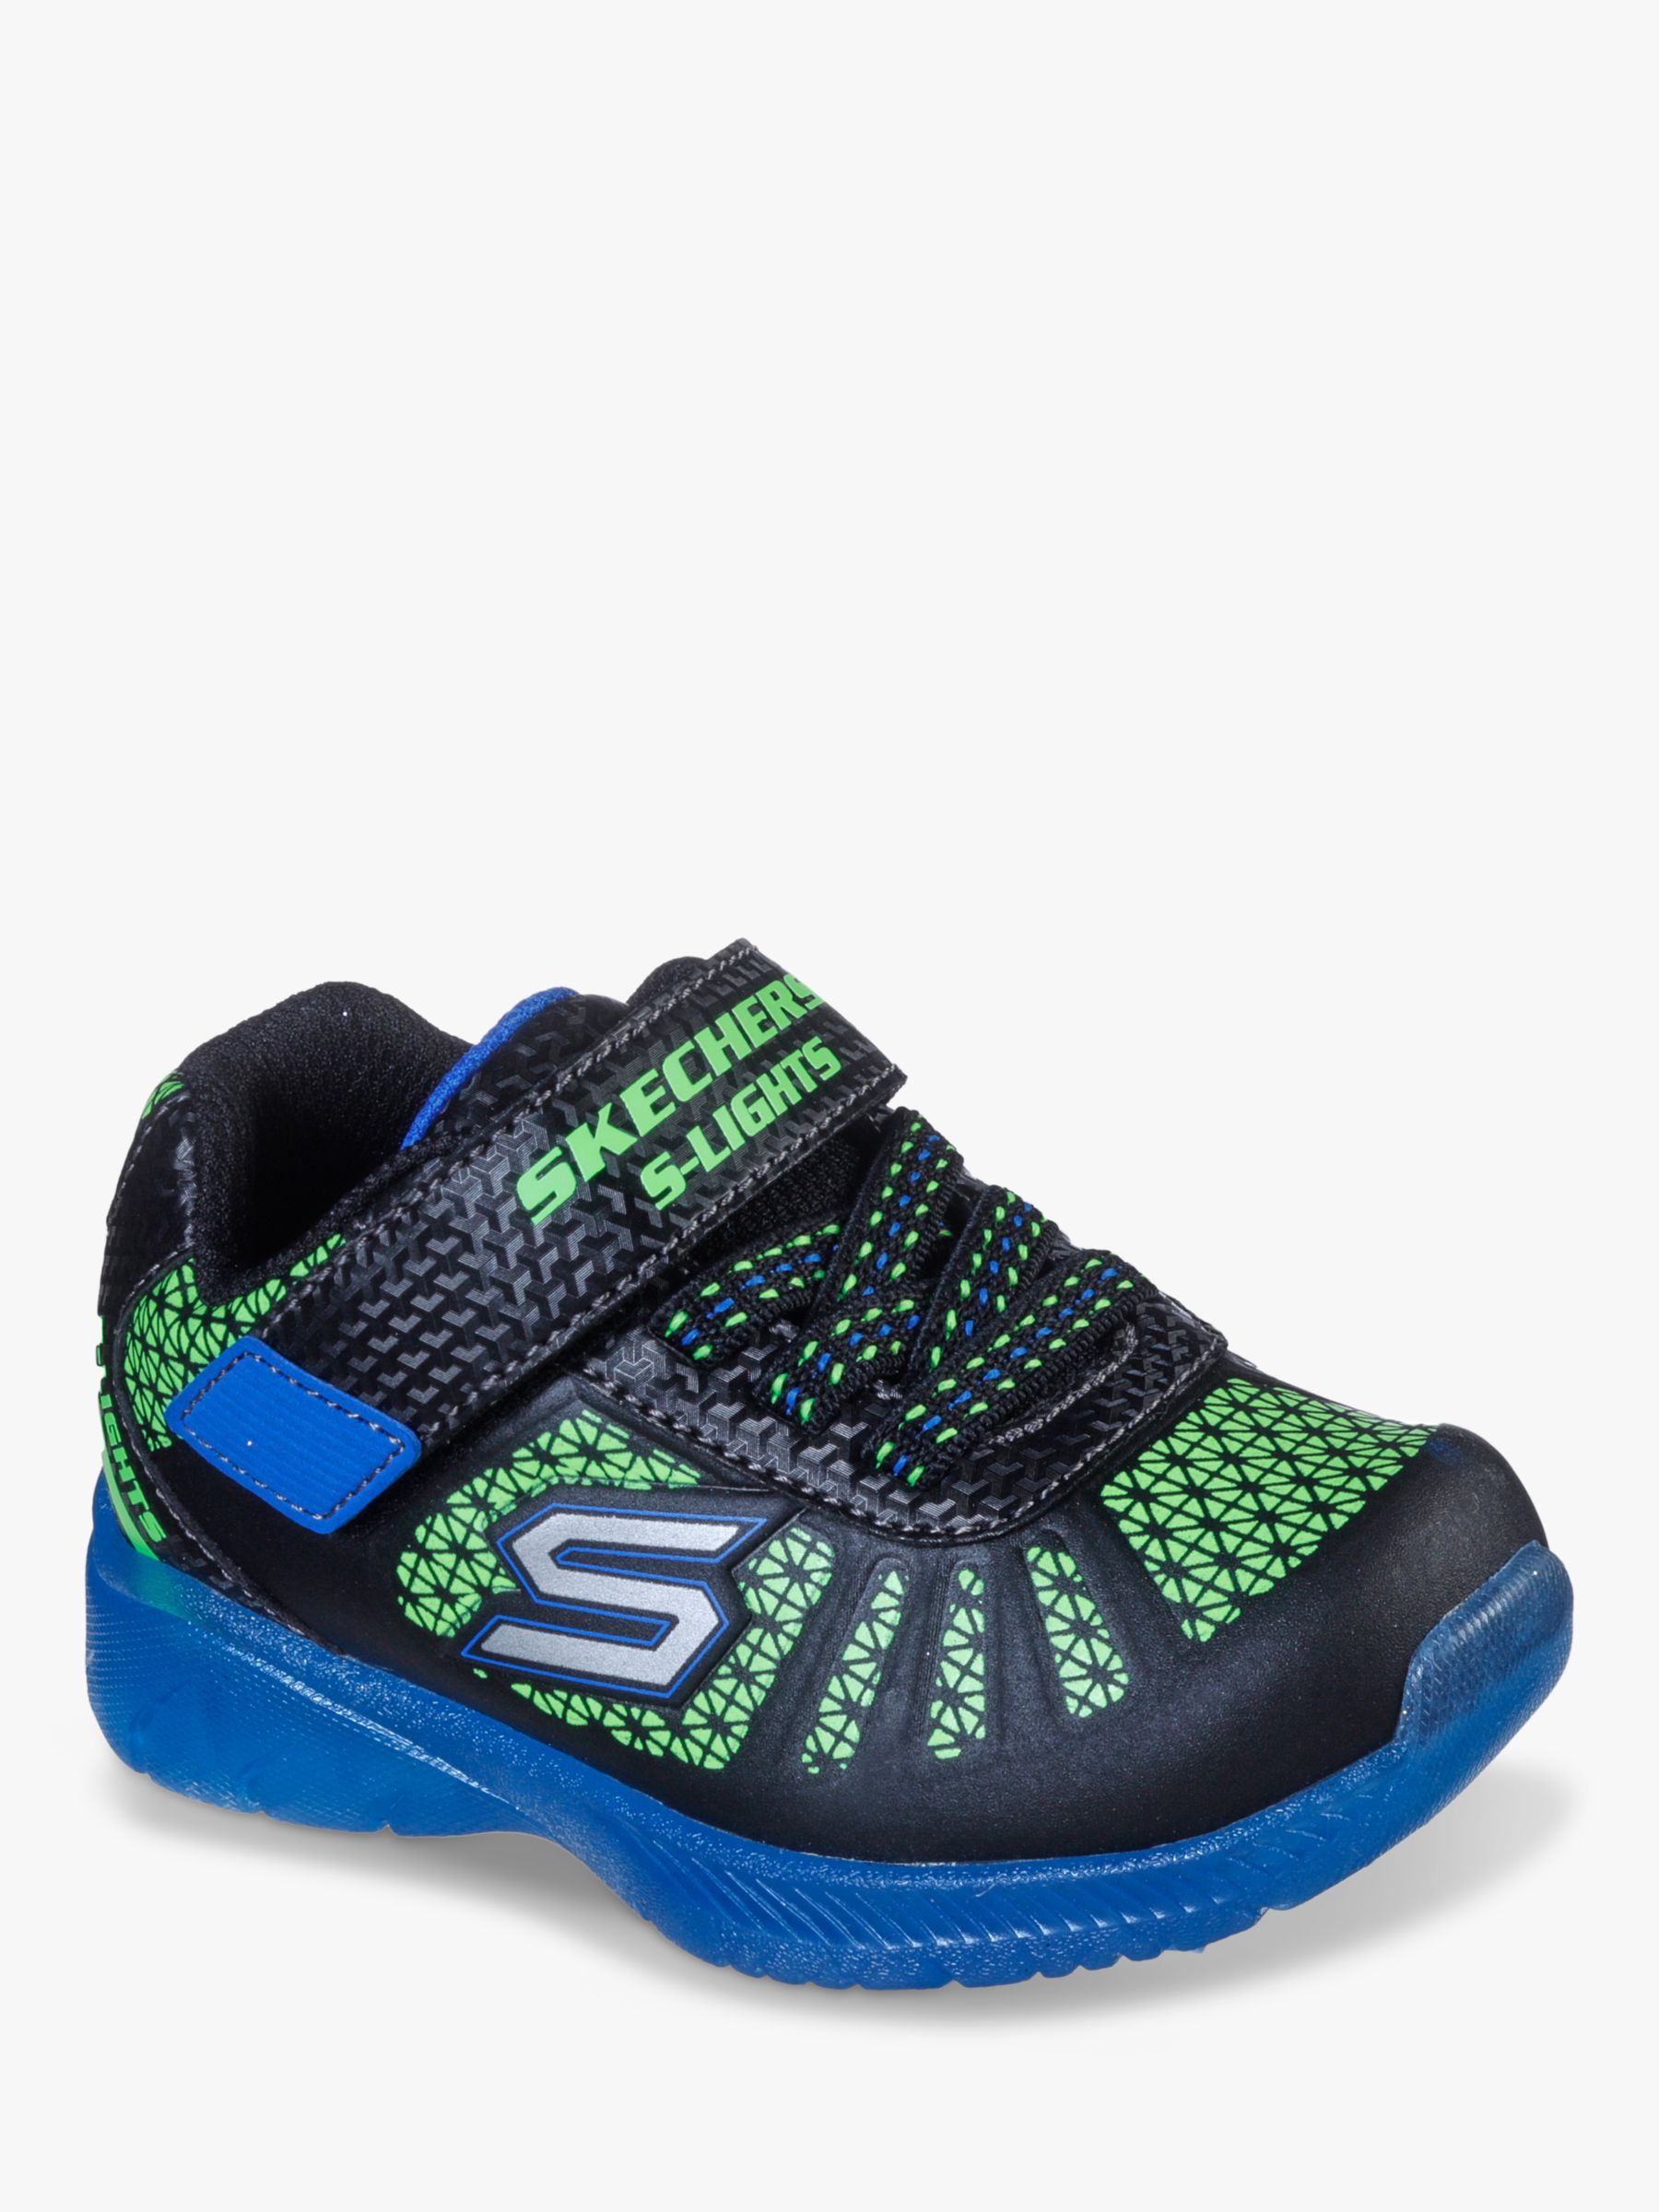 Skechers Children's S Lights Illumi-Brights Light Up Trainers, Black/Lime at John Lewis & Partners